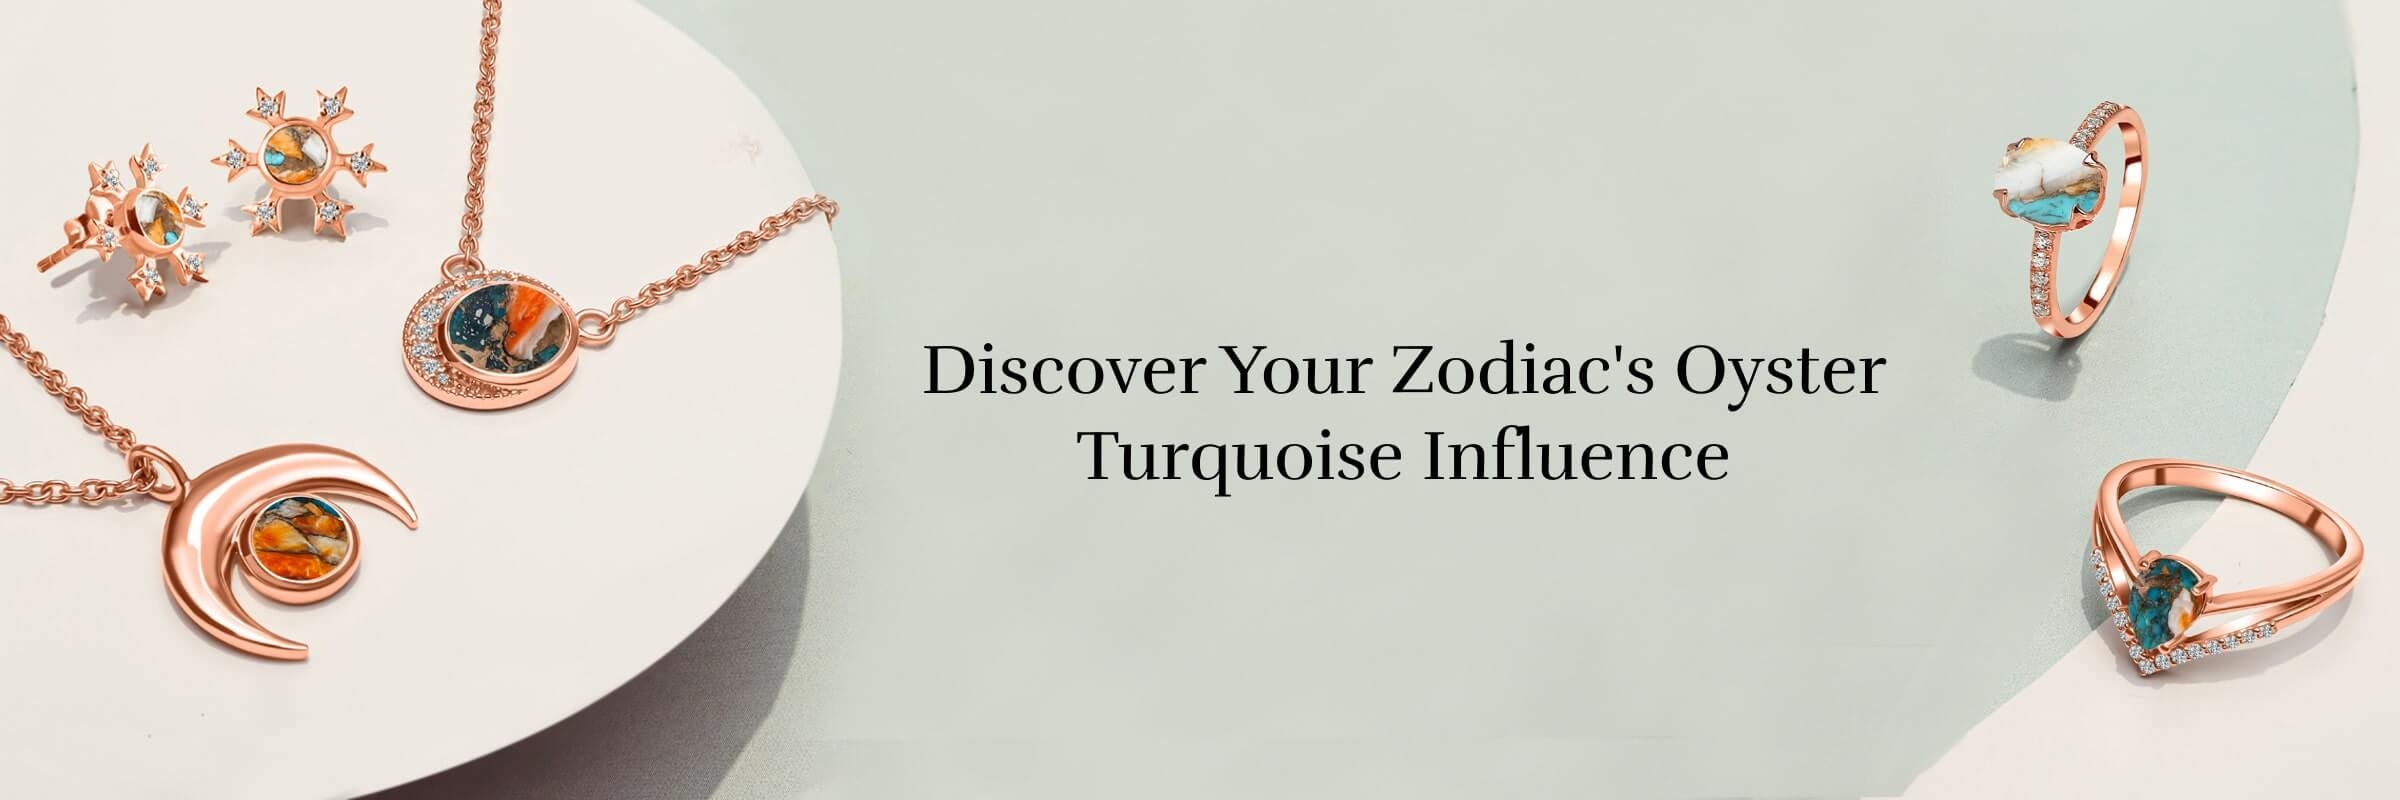 Oyster Turquoise Zodiac sign